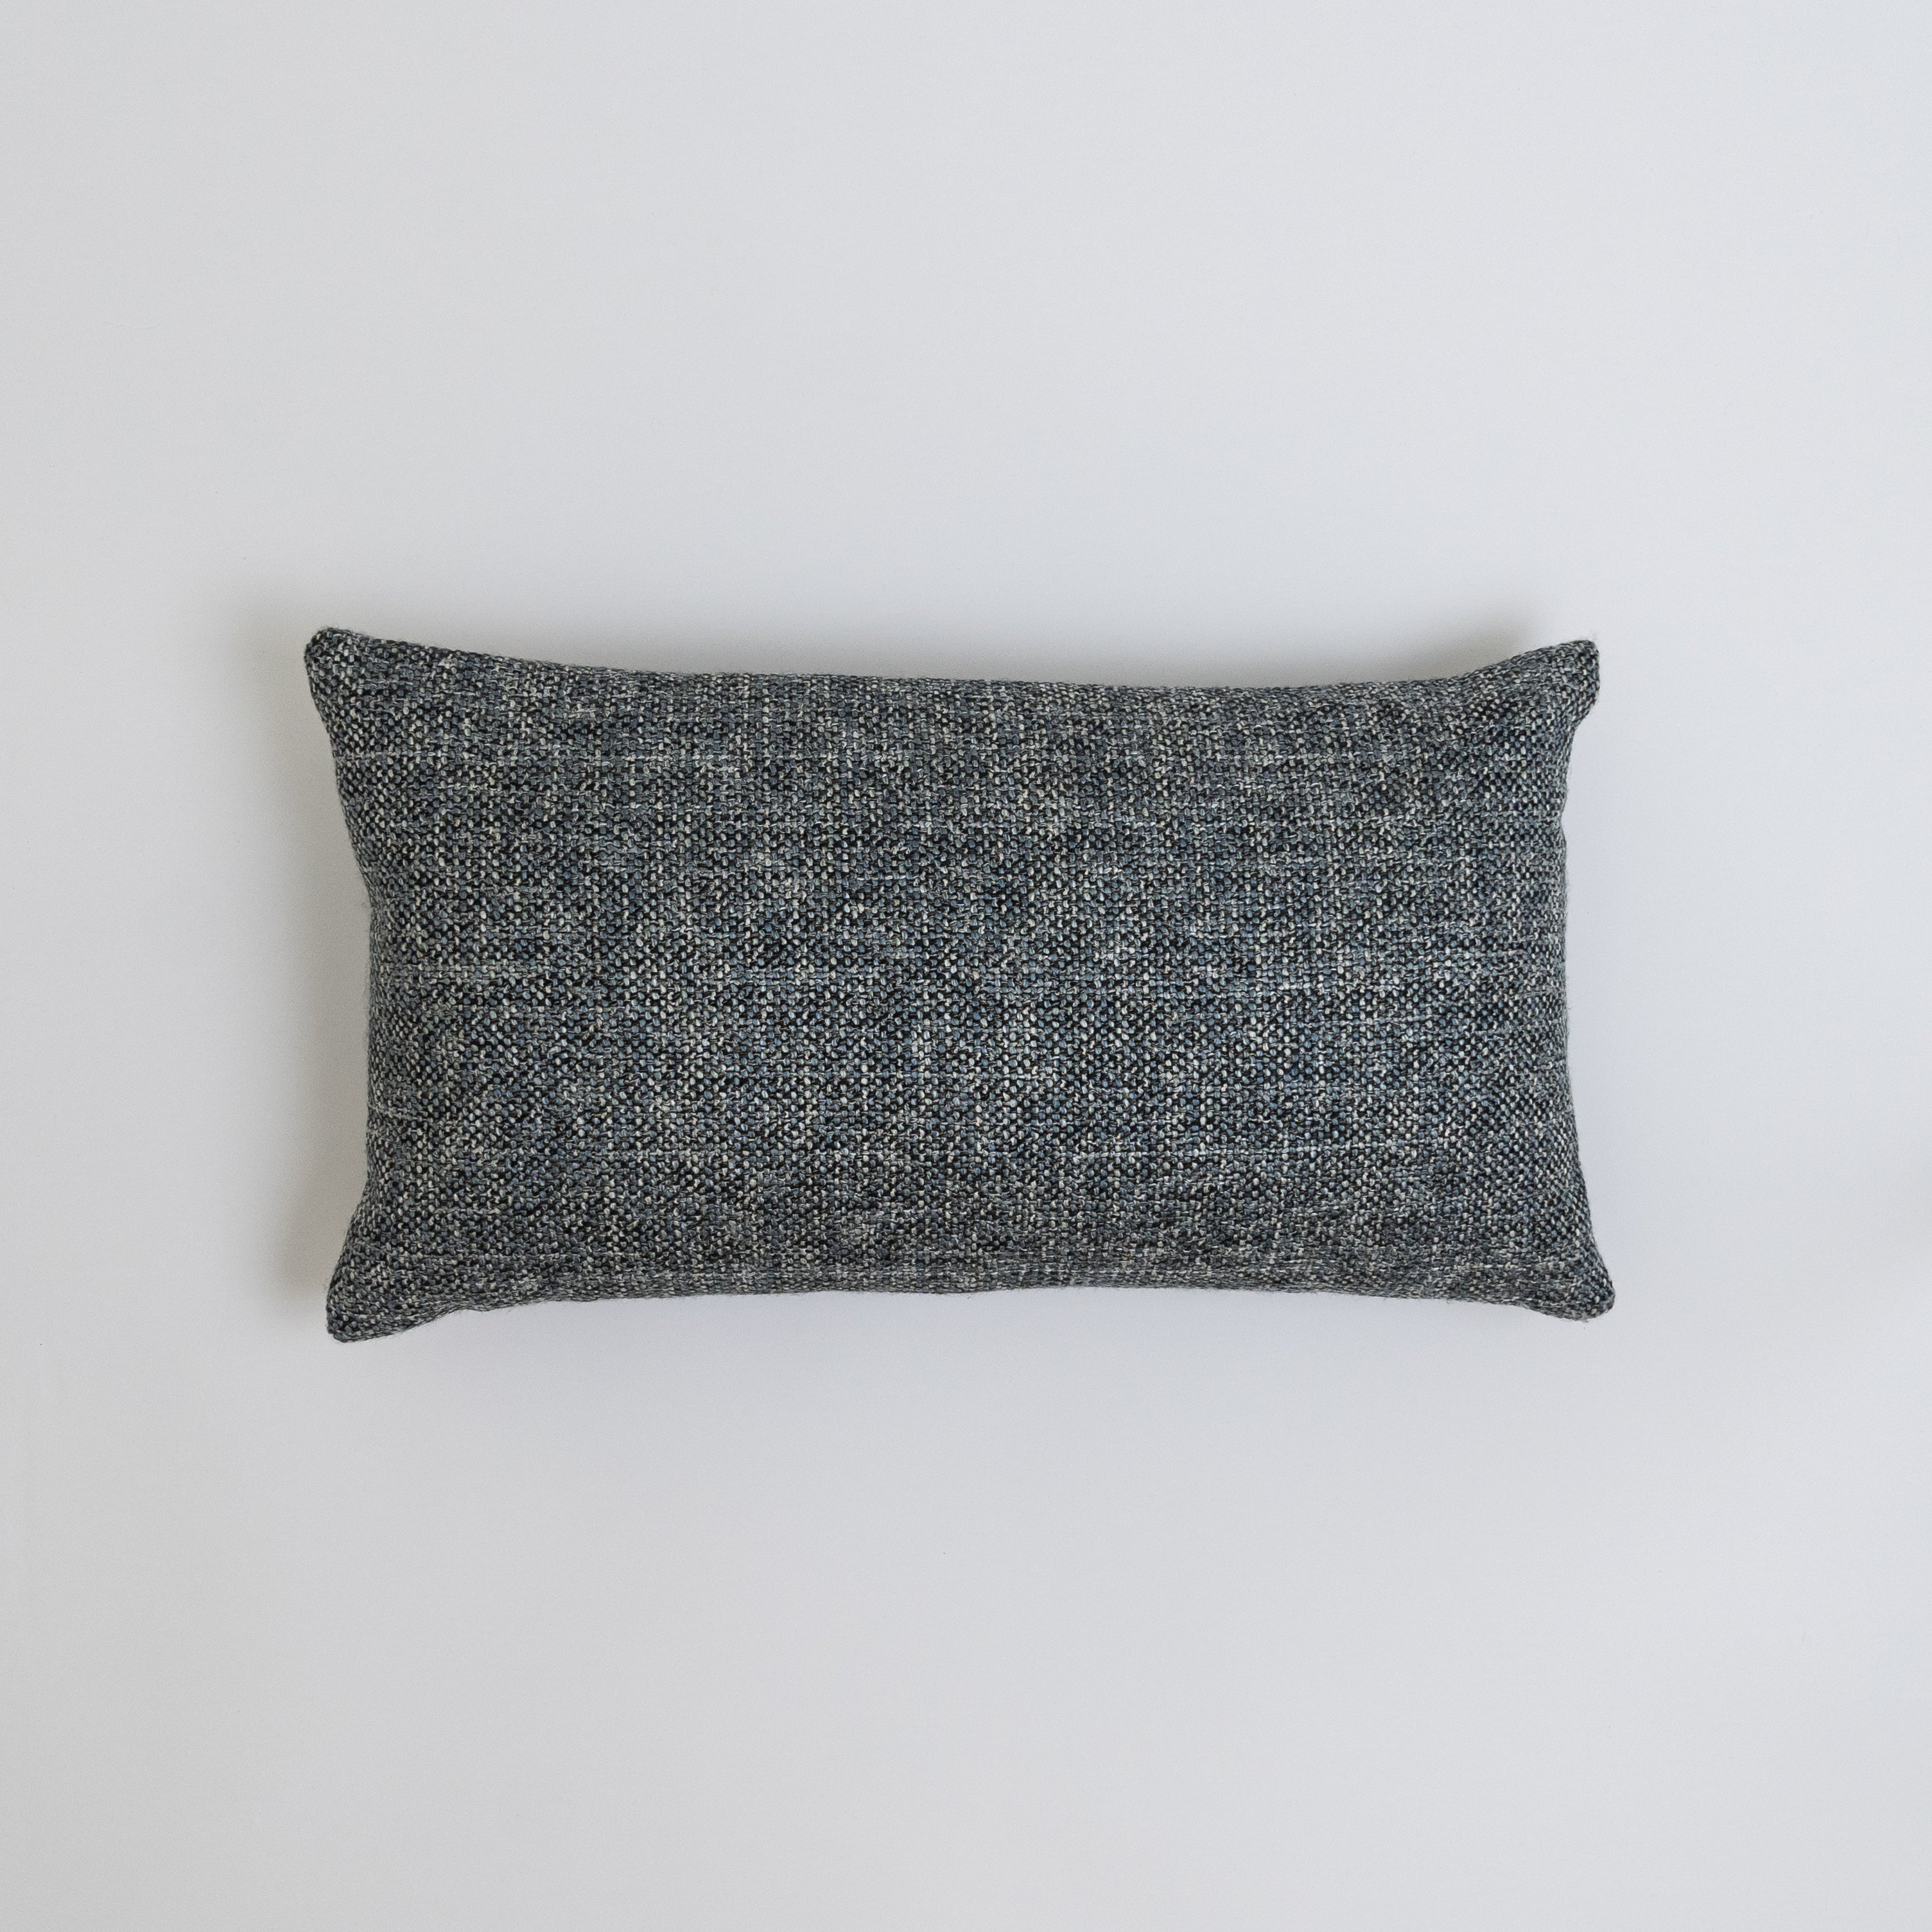 Cushion Cover Blue 30x60cm - Wood and Steel Furnitures